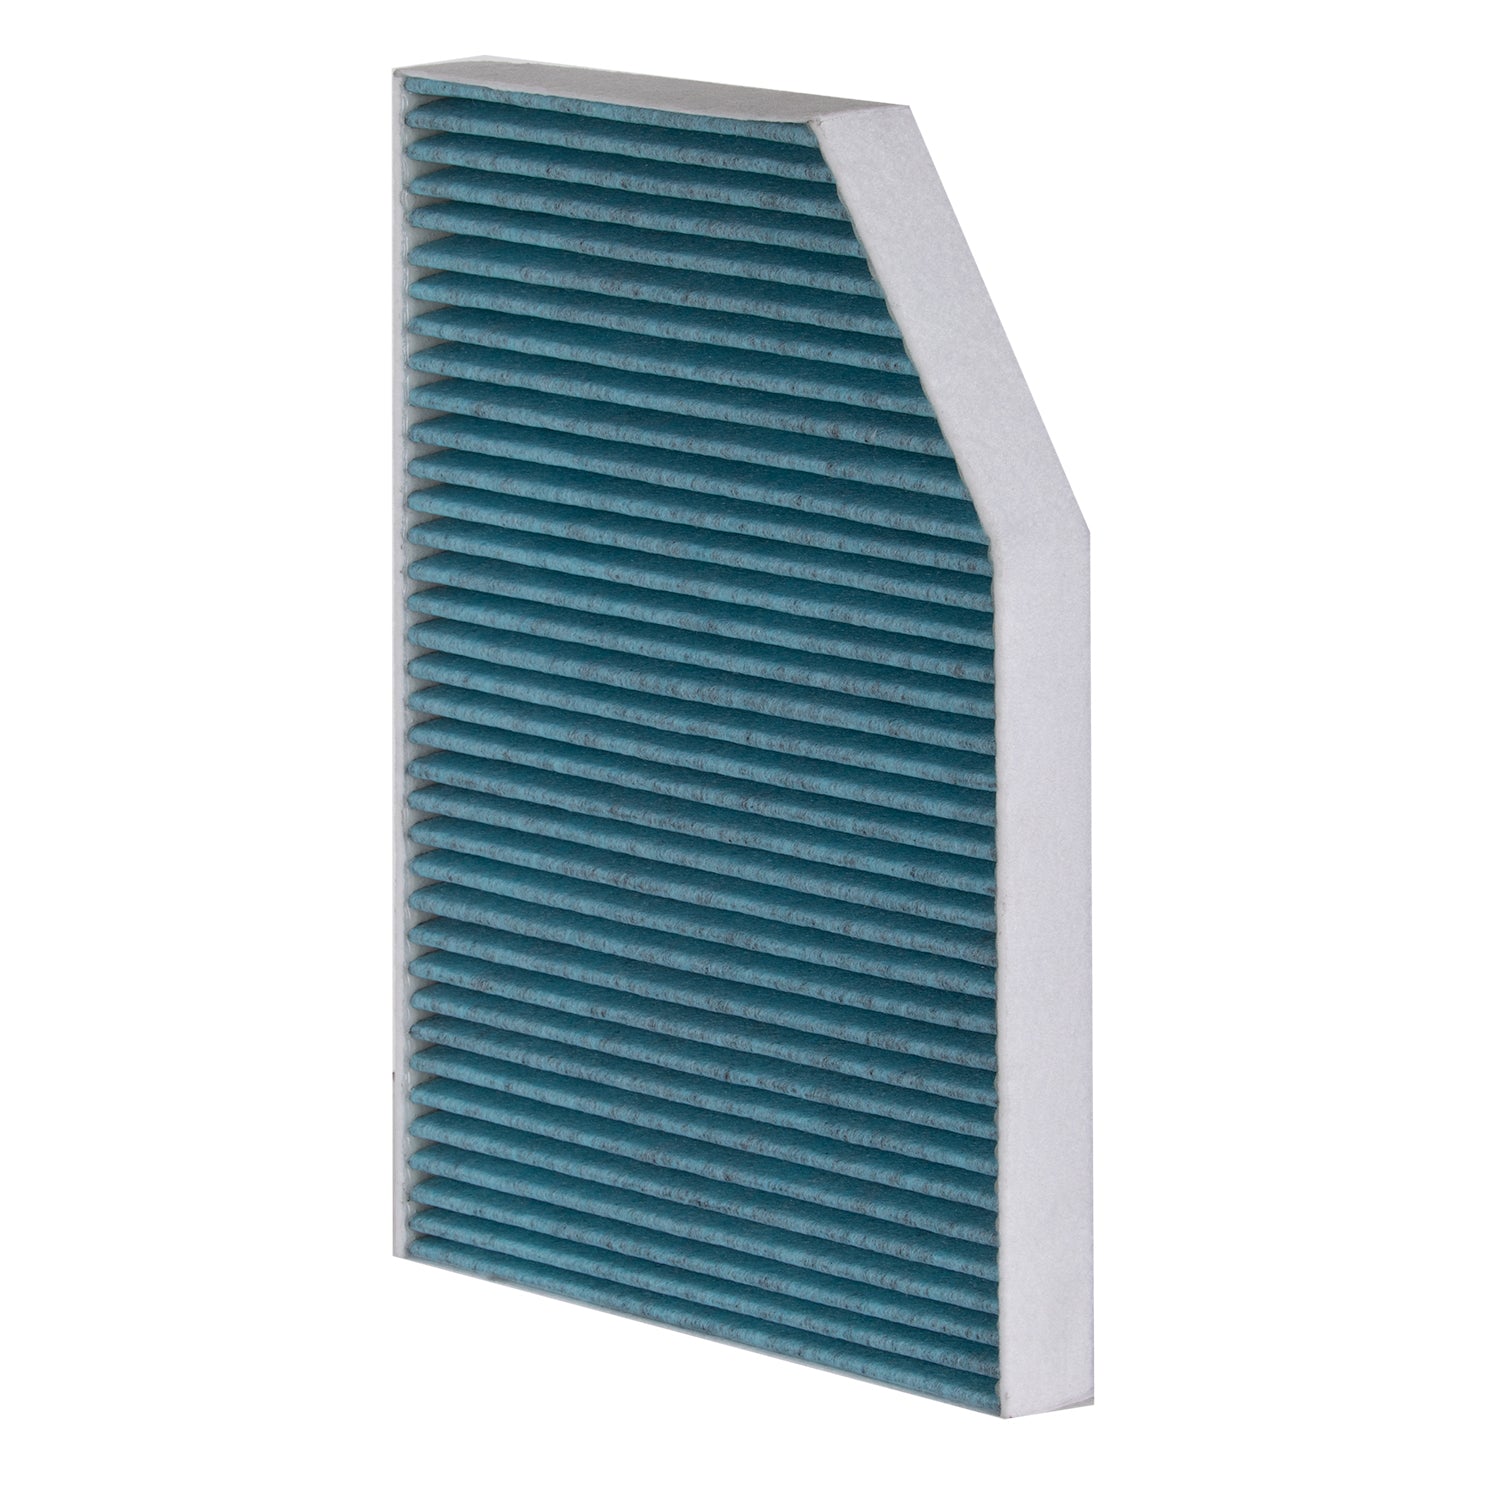 2021 BMW 330i Cabin Air Filter  PC99458X